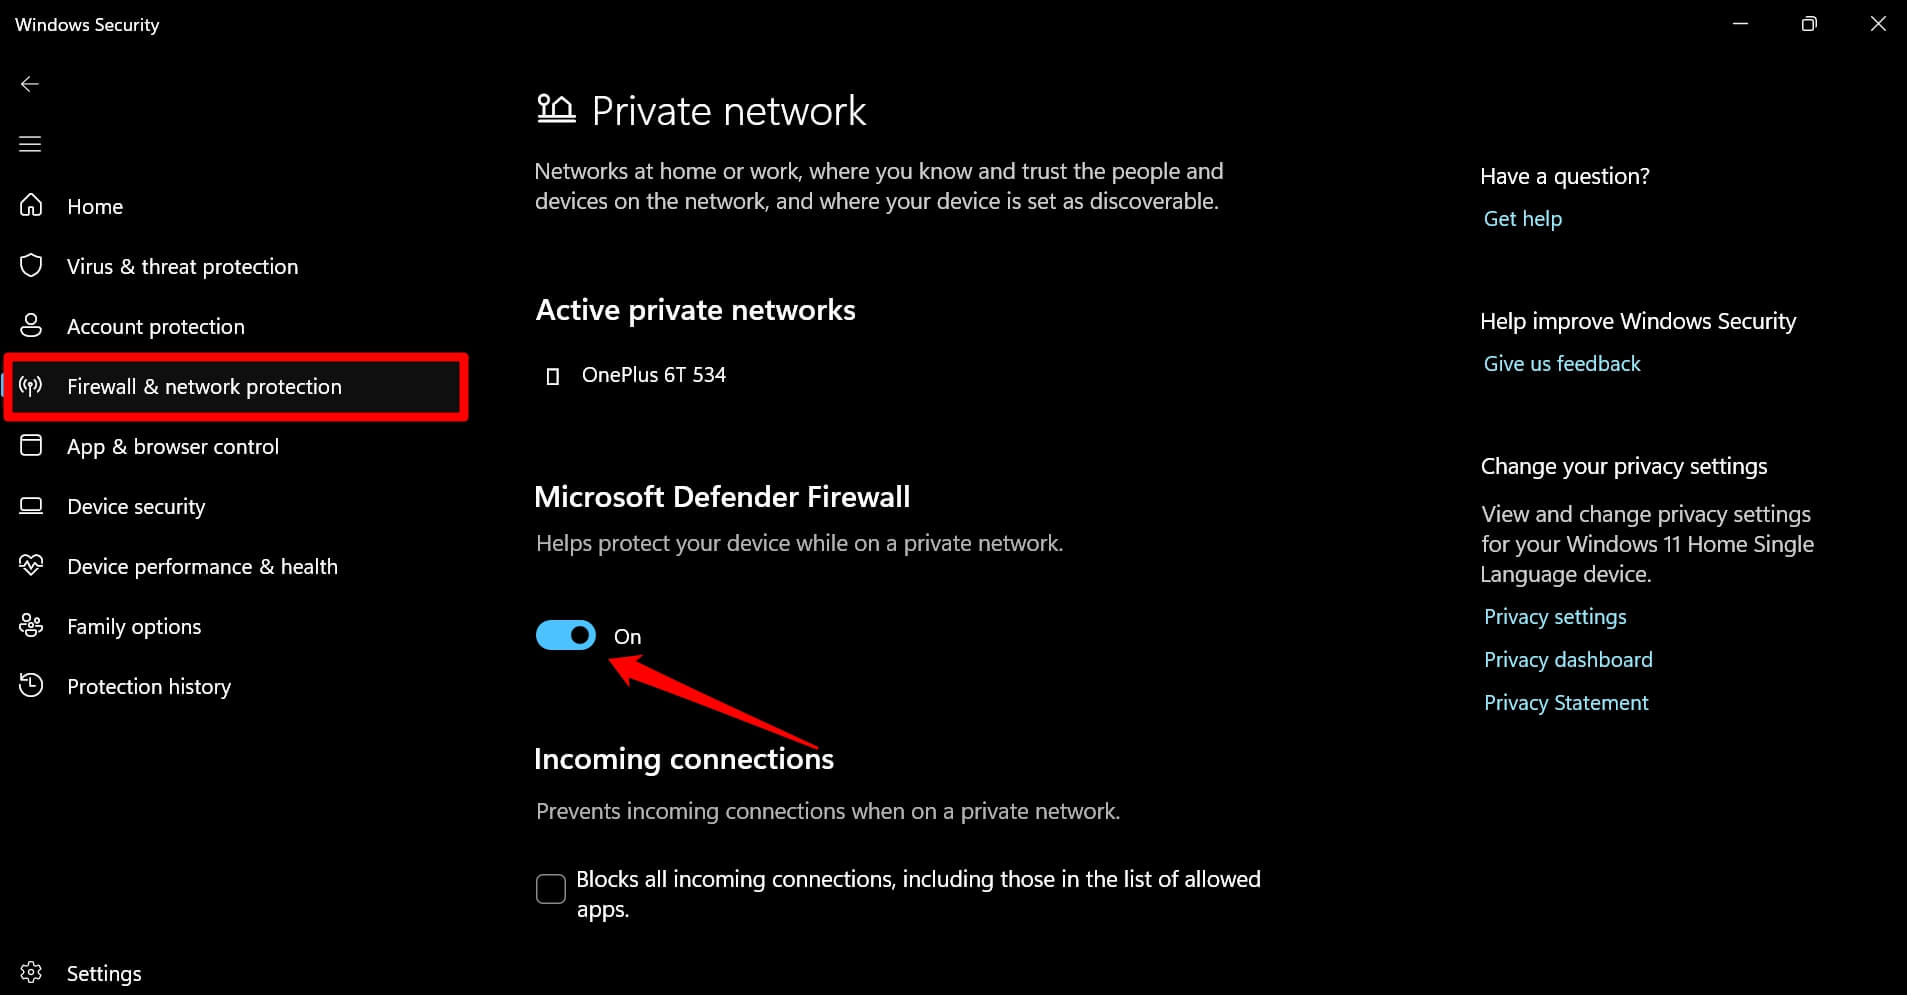 Microsoft-Defender-Firewall-Toggle-Switch-button-in-Windows-PC